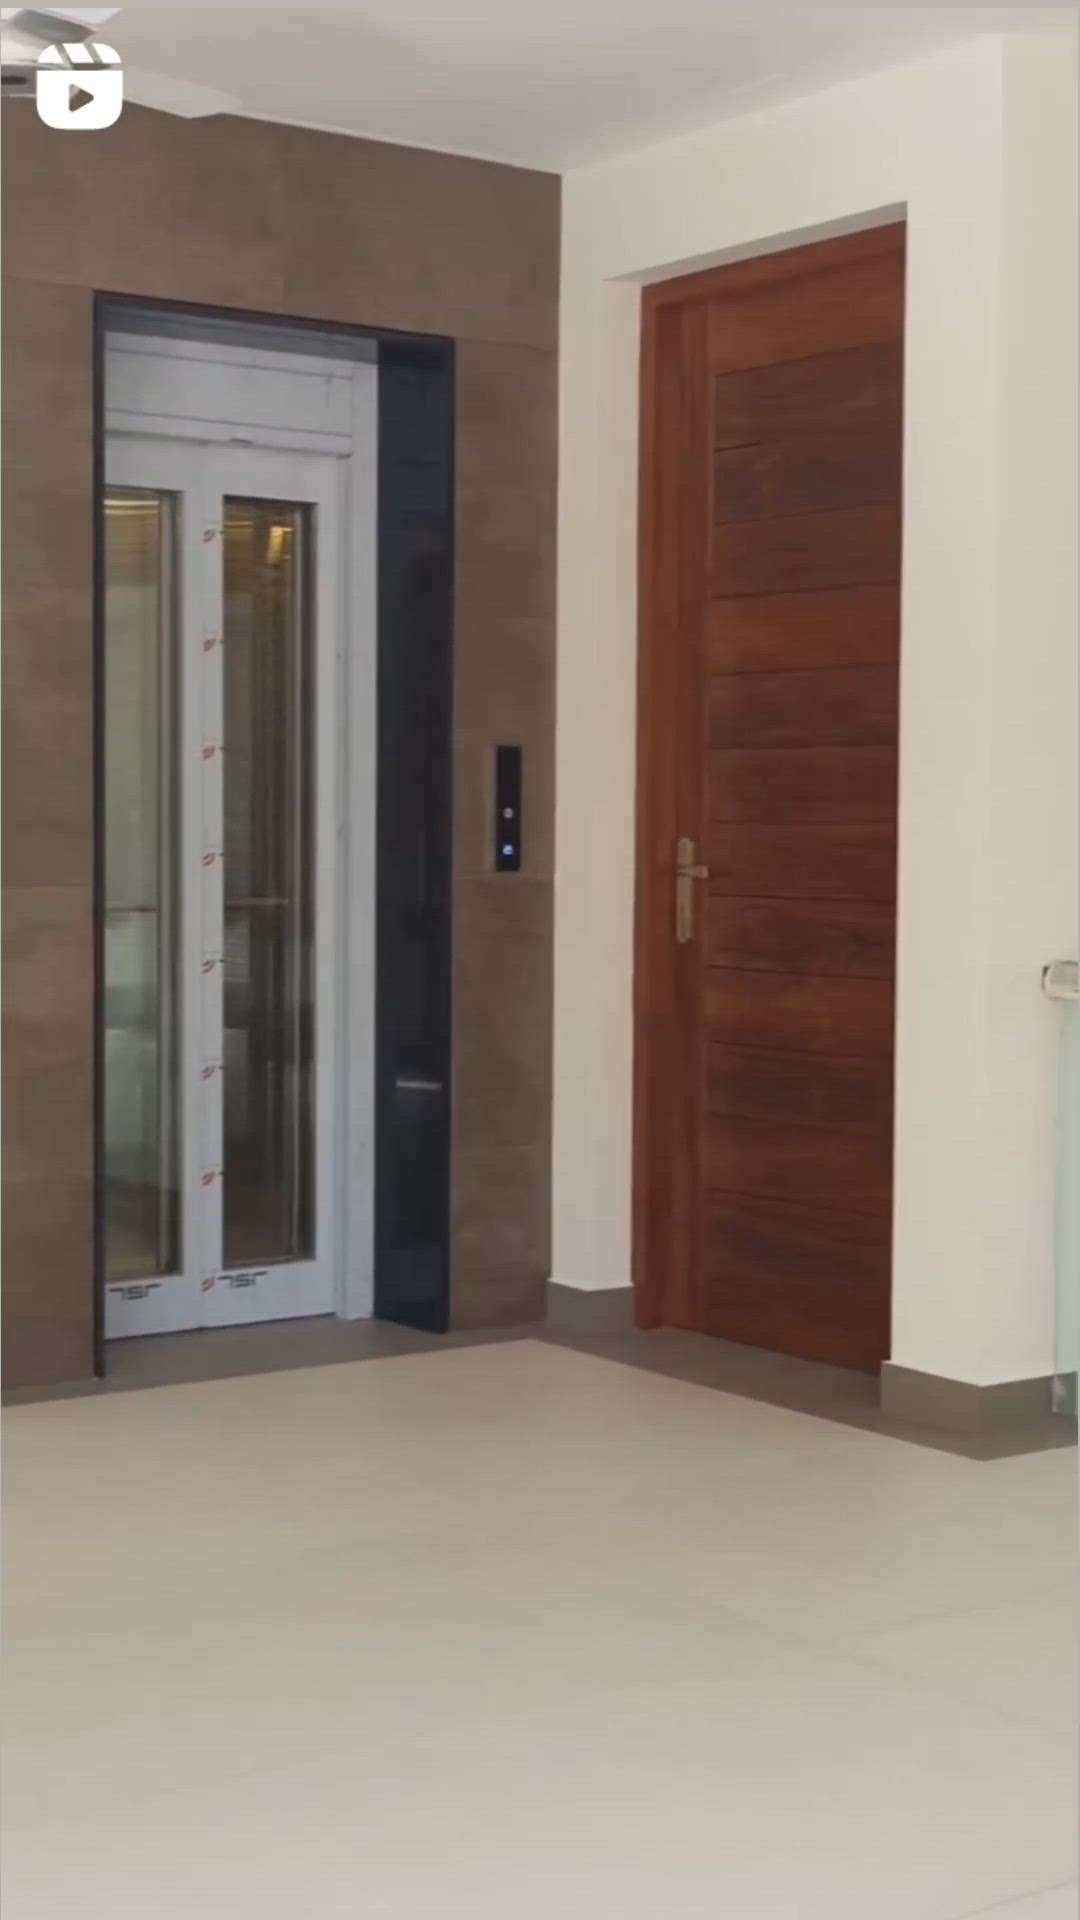 #Homeelevators #homeelevatorsinkerala          Unified Elevators is the leading Customer centric Elevator company in Kerala, associated with imported MRL elevator technology. Unified Elevators offer multiple benefits to customers who purchase unified elevators products. You can checkout the products below at affordable elevator prices. 

Home Elevators
Hospital Elevators
Capsule Elevators
Glass Elevators
Small Elevators
Passenger Elevators
Hydraulic Elevators


#Elevators #bestelevators #bestekevatorsinKerala
#Elevatorsinkerala
#Homeelevators #homeelevatorsinKerala #unifiedelevators ———————————
📲 (+91) 9061718002
📲 (+91) 8547855058
———————————
Facebook | Instagram | Site
—————————————————————
Kerala | Bengalore | Chennai | Calicut